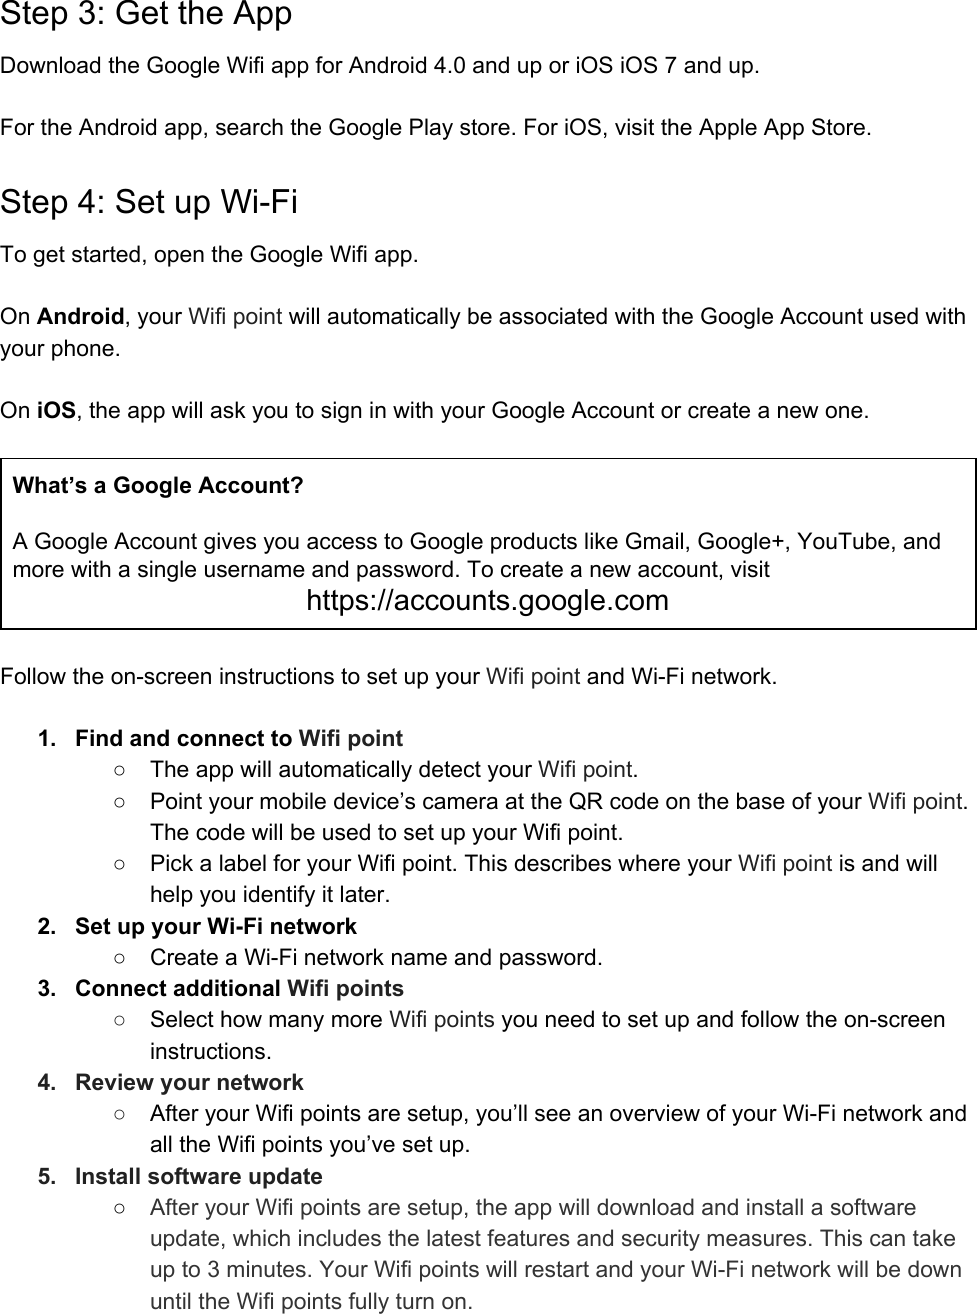 Step 3: Get the App Download the Google Wifi app for Android 4.0 and up or iOS iOS 7 and up.  For the Android app, search the Google Play store. For iOS, visit the Apple App Store. Step 4: Set up Wi-Fi To get started, open the Google Wifi app.  On Android, your Wifi point will automatically be associated with the Google Account used with your phone.  On iOS, the app will ask you to sign in with your Google Account or create a new one.  What’s a Google Account?  A Google Account gives you access to Google products like Gmail, Google+, YouTube, and more with a single username and password. To create a new account, visit https://accounts.google.com  Follow the on-screen instructions to set up your Wifi point and Wi-Fi network.  1. Find and connect to Wifi point ○ The app will automatically detect your Wifi point. ○ Point your mobile device’s camera at the QR code on the base of your Wifi point. The code will be used to set up your Wifi point. ○ Pick a label for your Wifi point. This describes where your Wifi point is and will help you identify it later. 2. Set up your Wi-Fi network ○ Create a Wi-Fi network name and password. 3. Connect additional Wifi points ○Select how many more Wifi points you need to set up and follow the on-screen instructions. 4. Review your network ○After your Wifi points are setup, you’ll see an overview of your Wi-Fi network and all the Wifi points you’ve set up. 5. Install software update ○After your Wifi points are setup, the app will download and install a software update, which includes the latest features and security measures. This can take up to 3 minutes. Your Wifi points will restart and your Wi-Fi network will be down until the Wifi points fully turn on. 